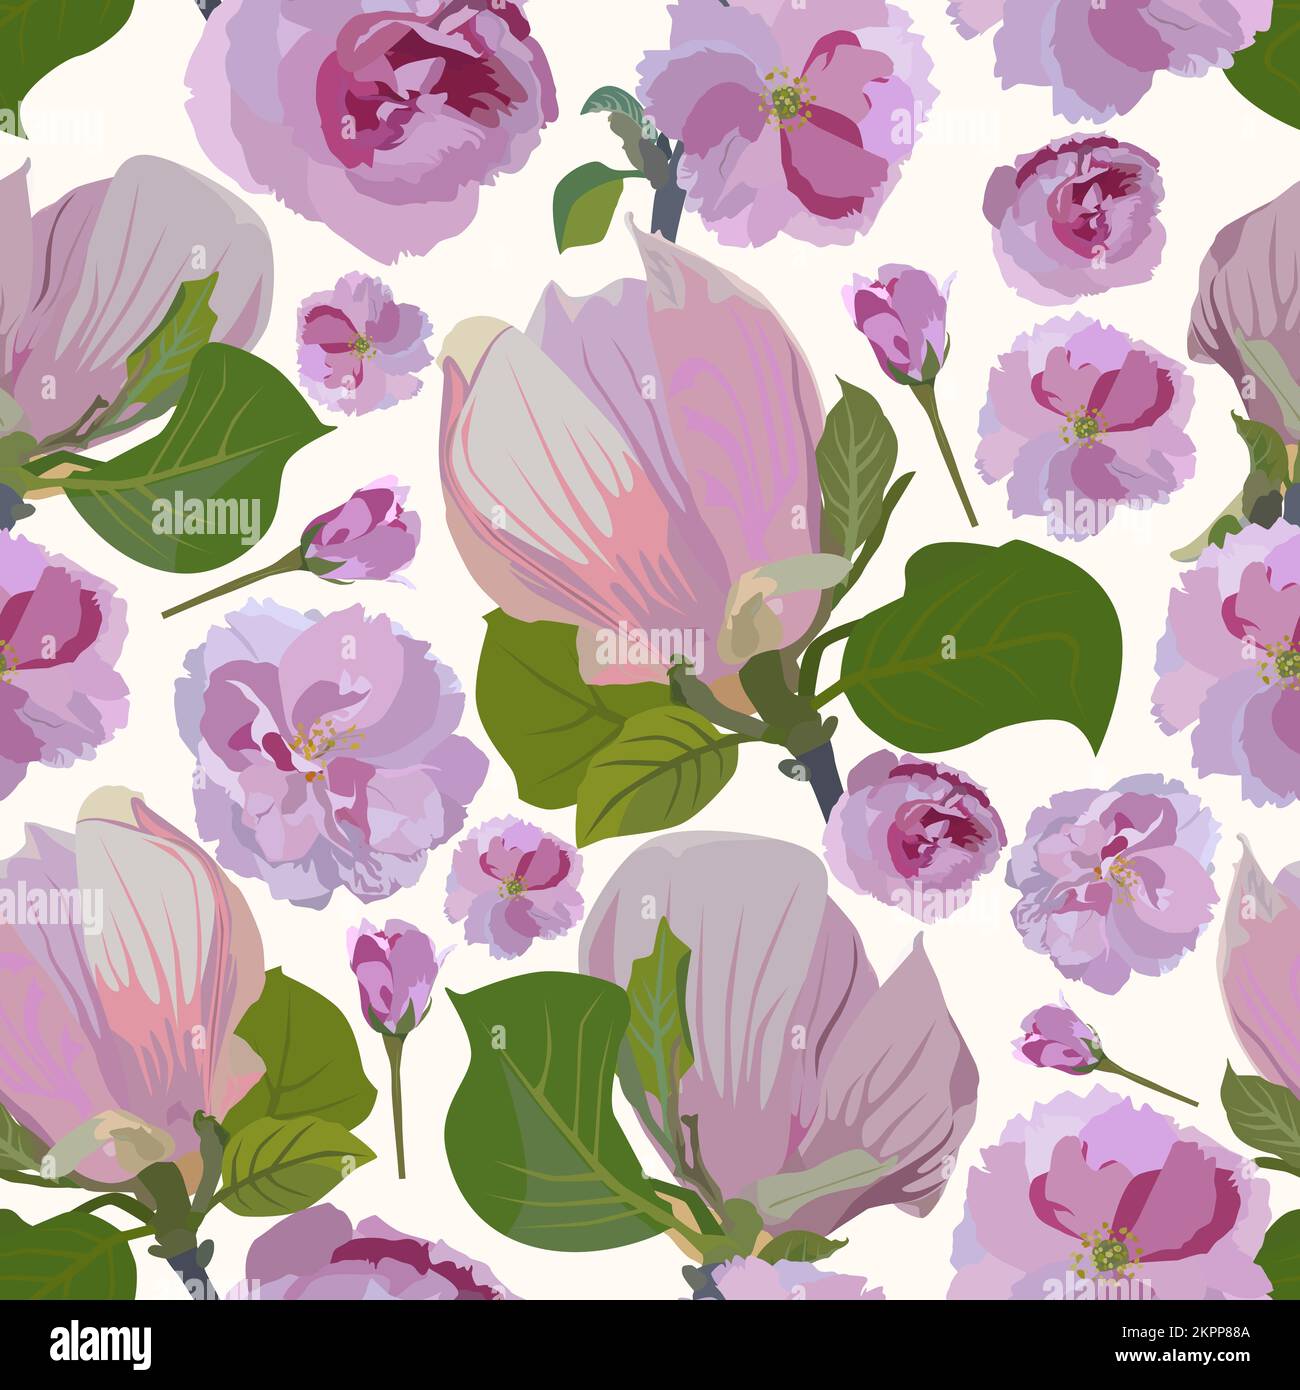 Vector seamless pattern with sakura, magnolia flowers. Spring floral background. Stock Vector